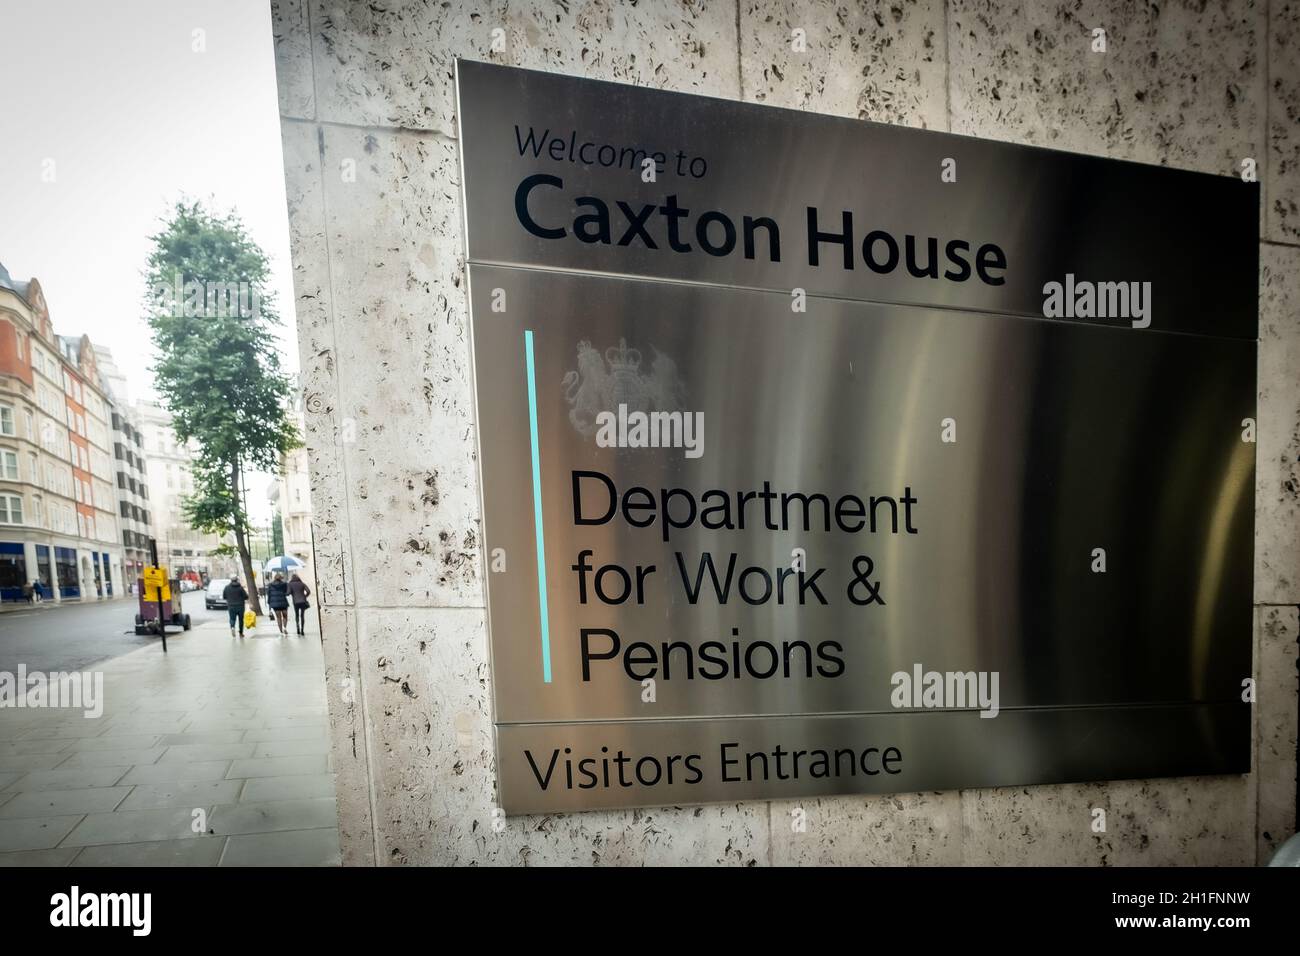 London- Department for Work & Pensions at Caxton House in Westminster. UK government building Stock Photo